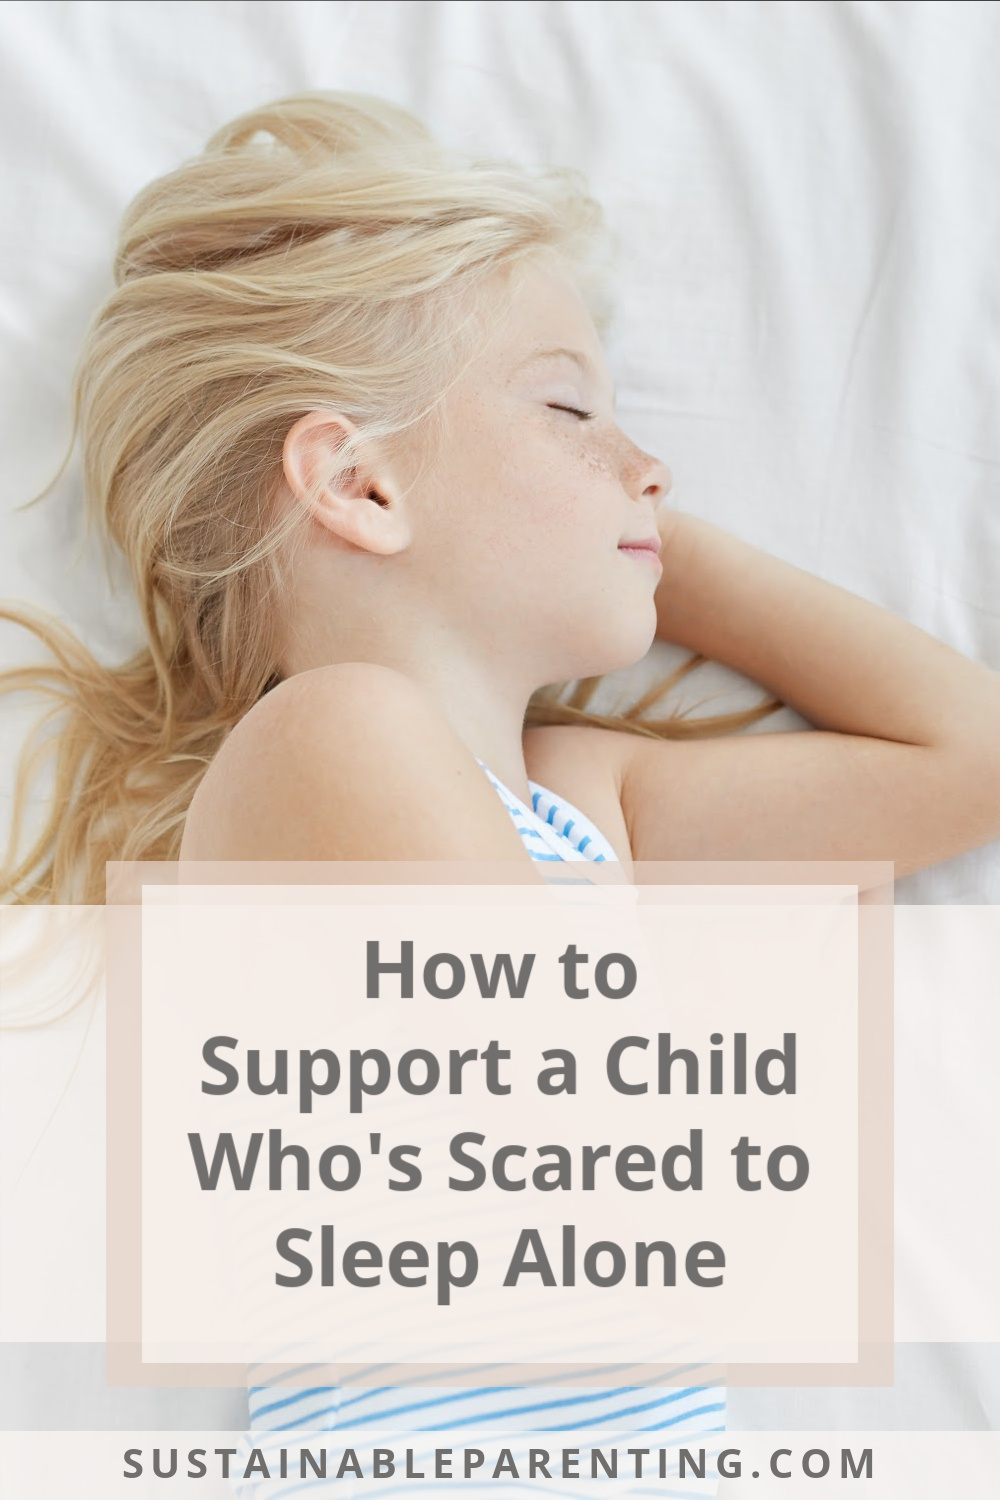 How to Support a Child Who’s Scared to Sleep Alone